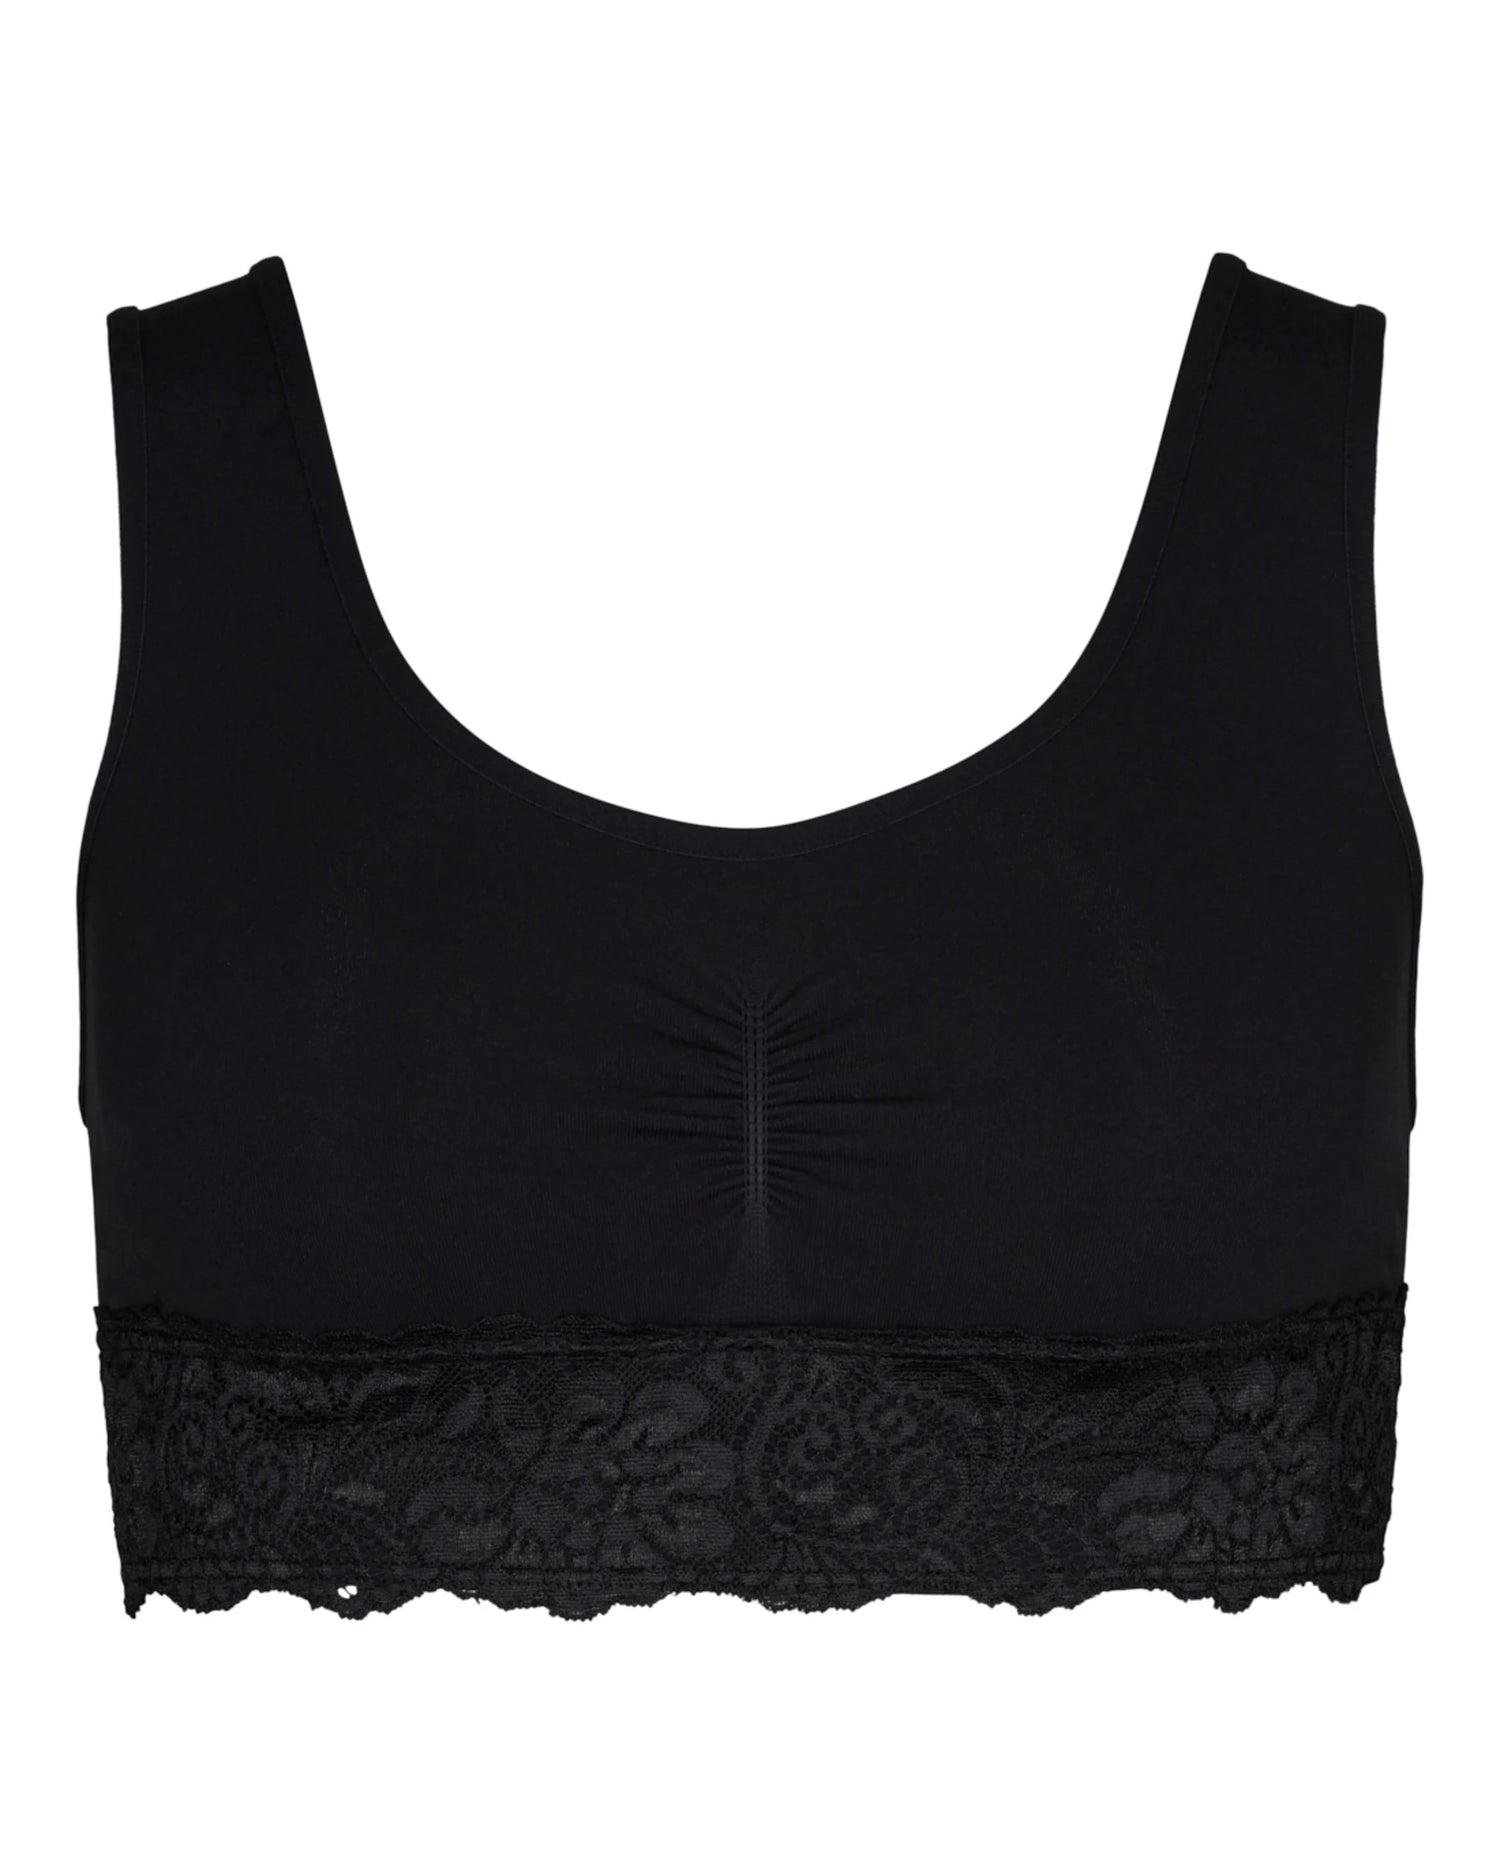 Laura Bra Top with lace - Black